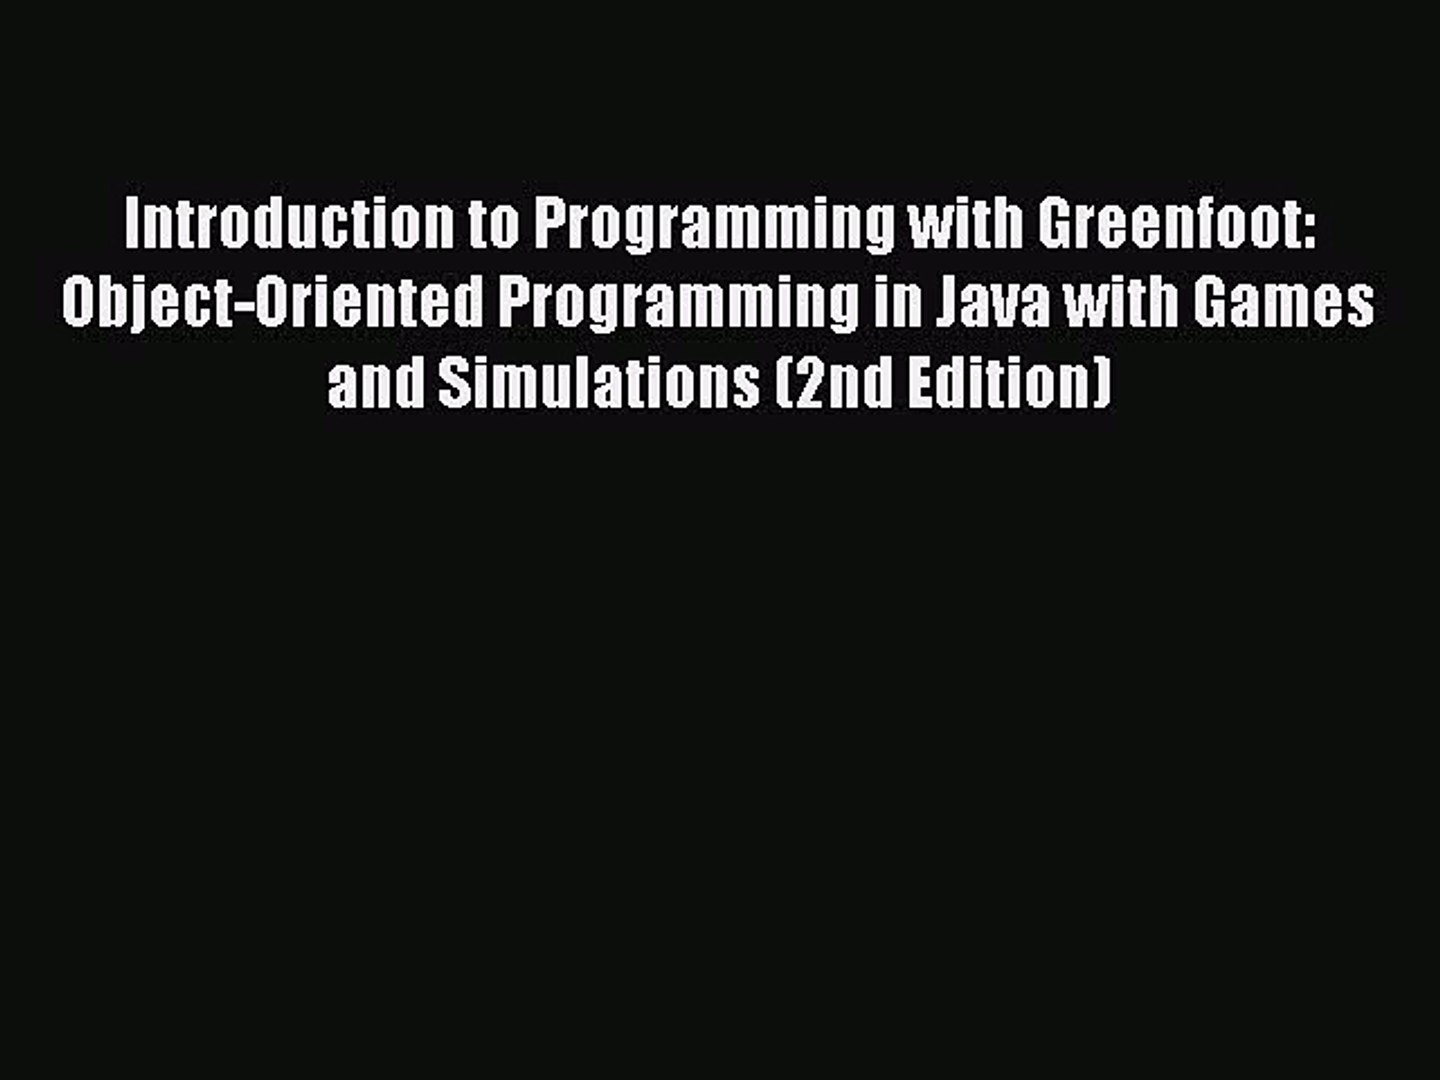 Read Introduction to Programming with Greenfoot: Object-Oriented Programming in Java with Games